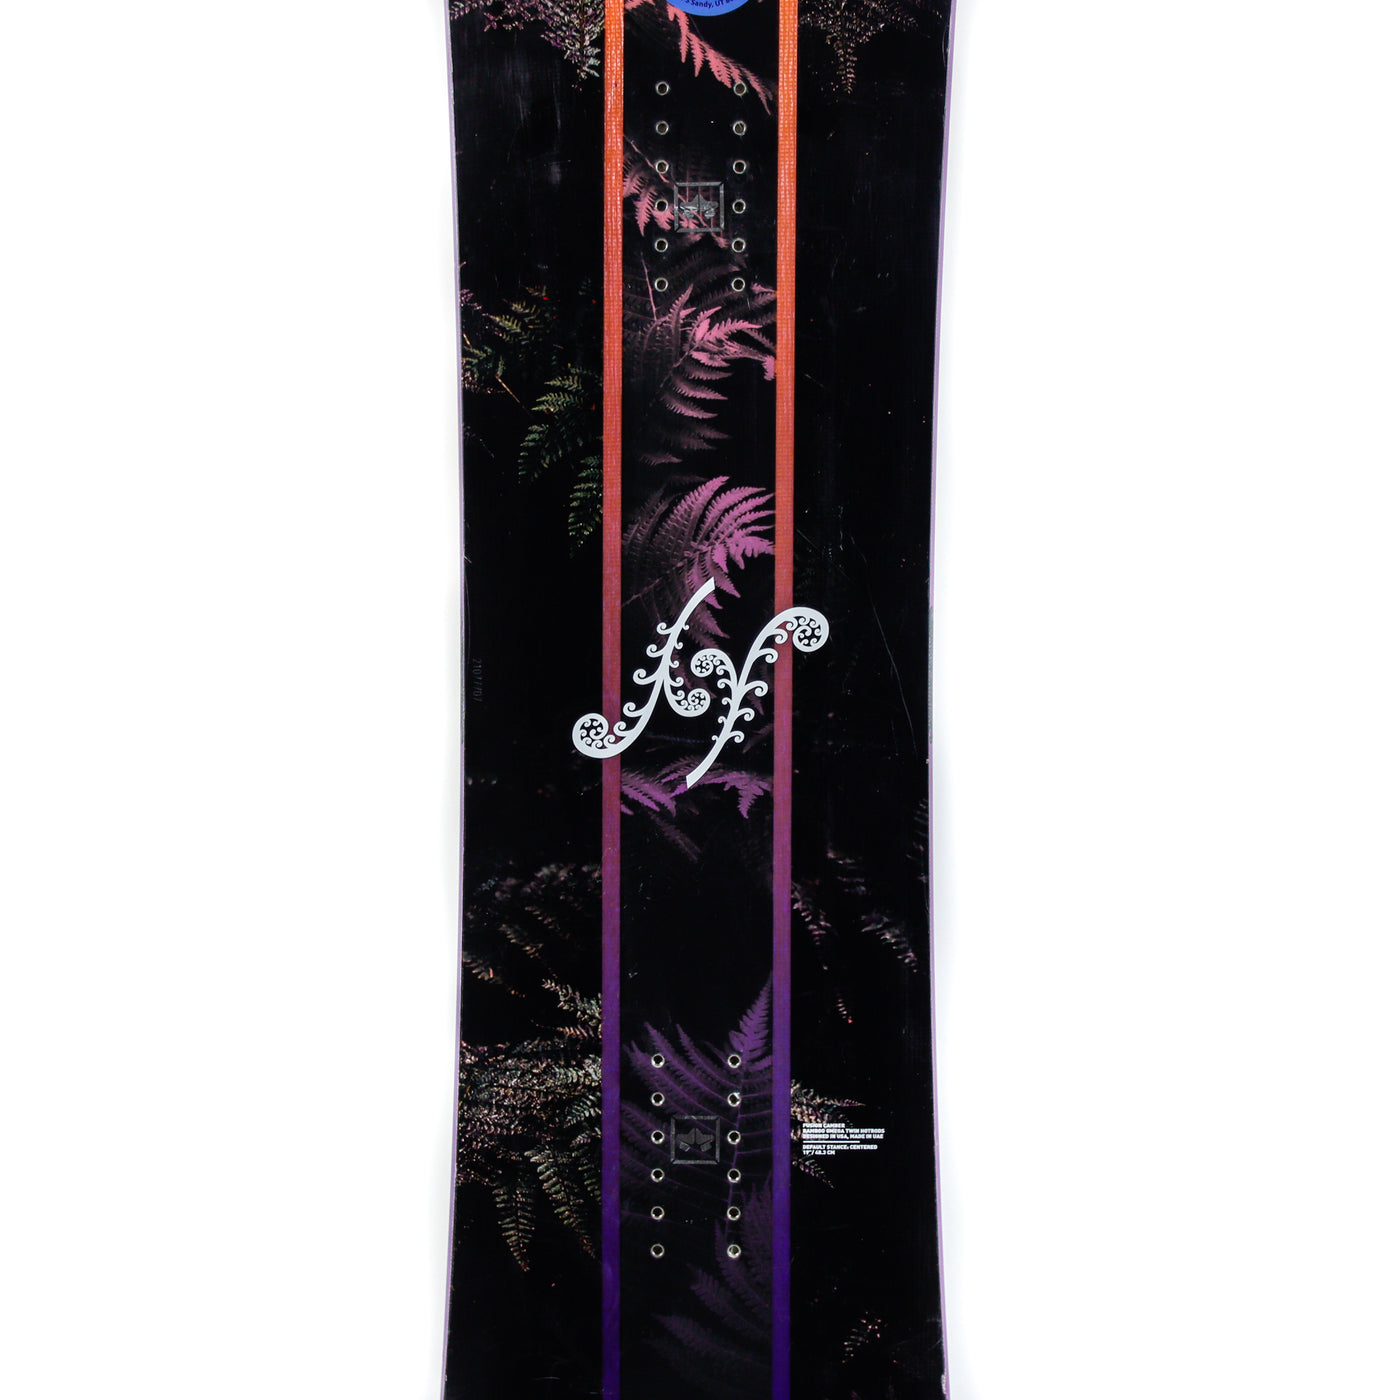 Rome SDS Heist Women’s Snowboard 2021  | Used SNOWBOARDS Rome   